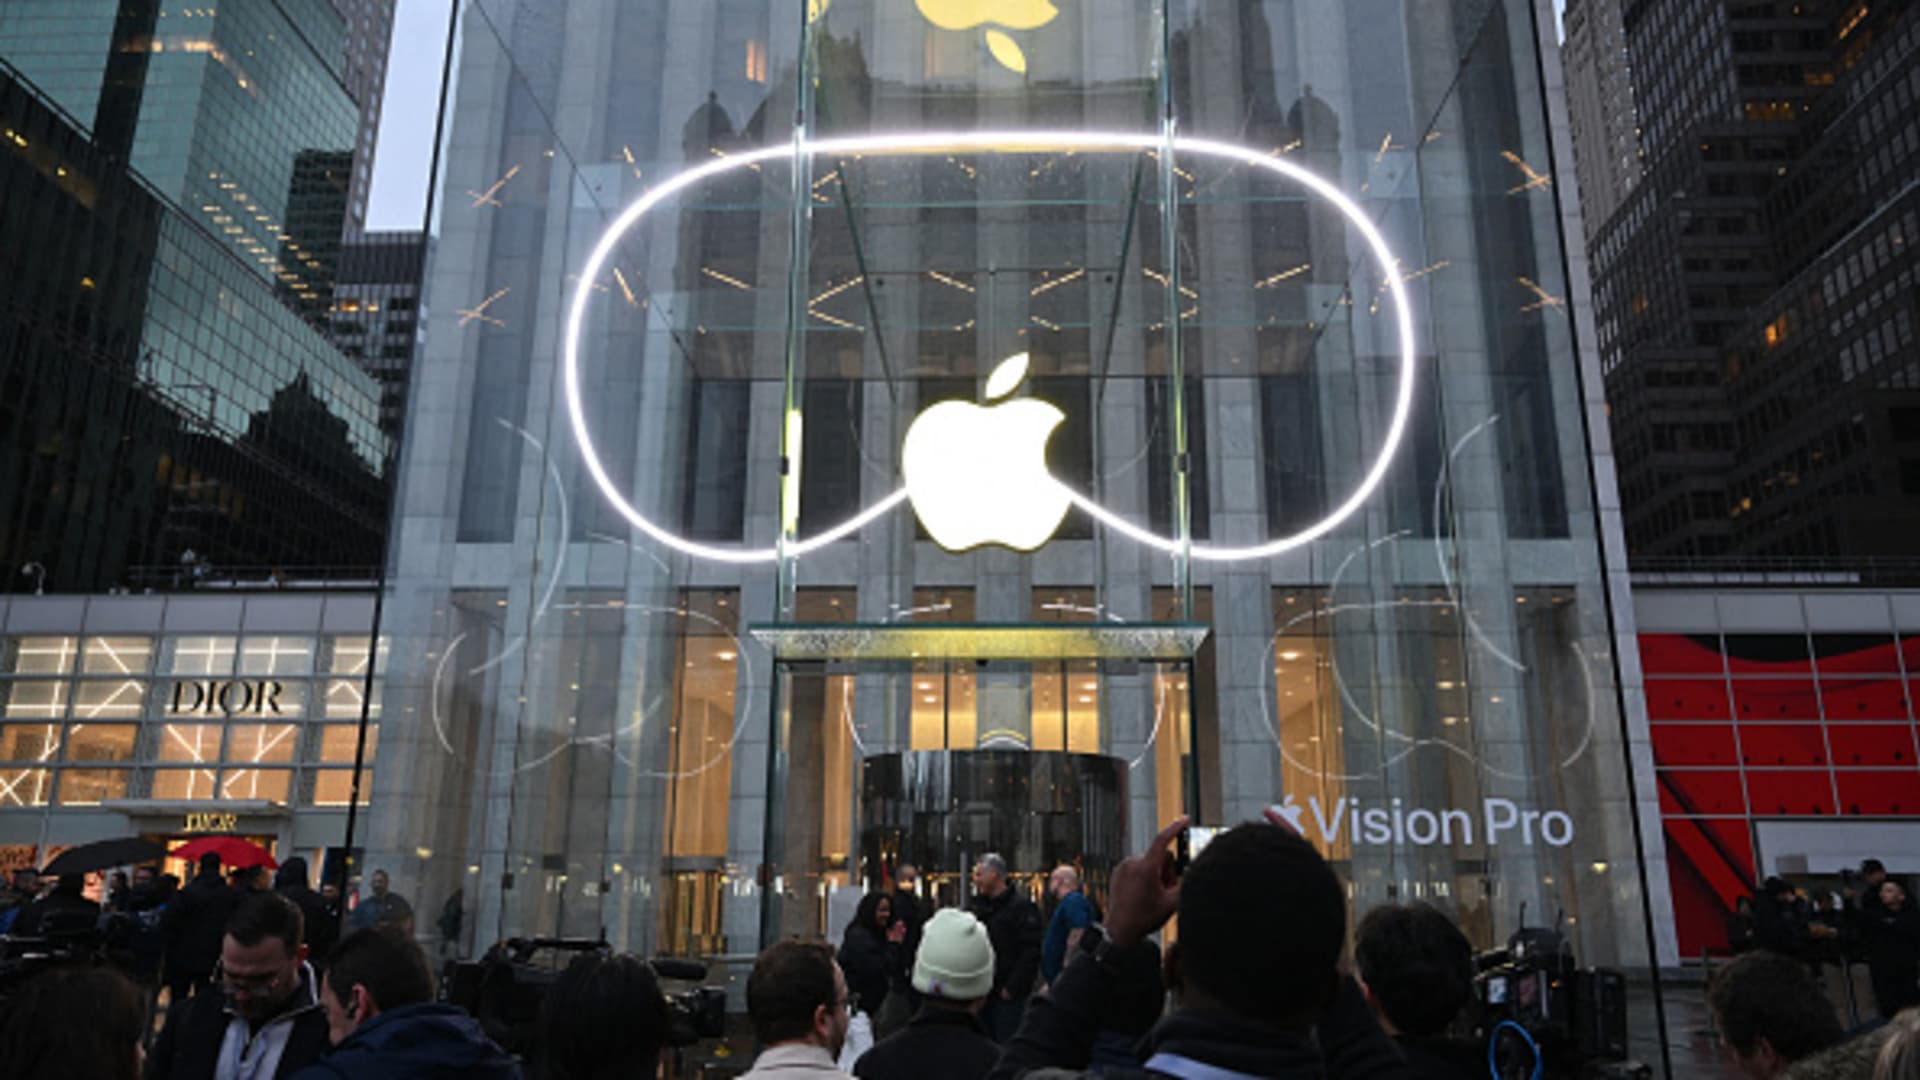 People line up outside the New York Apple Store on February 2, 2024, as the Vision Pro headset is released in US Apple stores. The Vision Pro, the tech giant's $3,499 headset, is its first major release since the Apple Watch nine years ago.